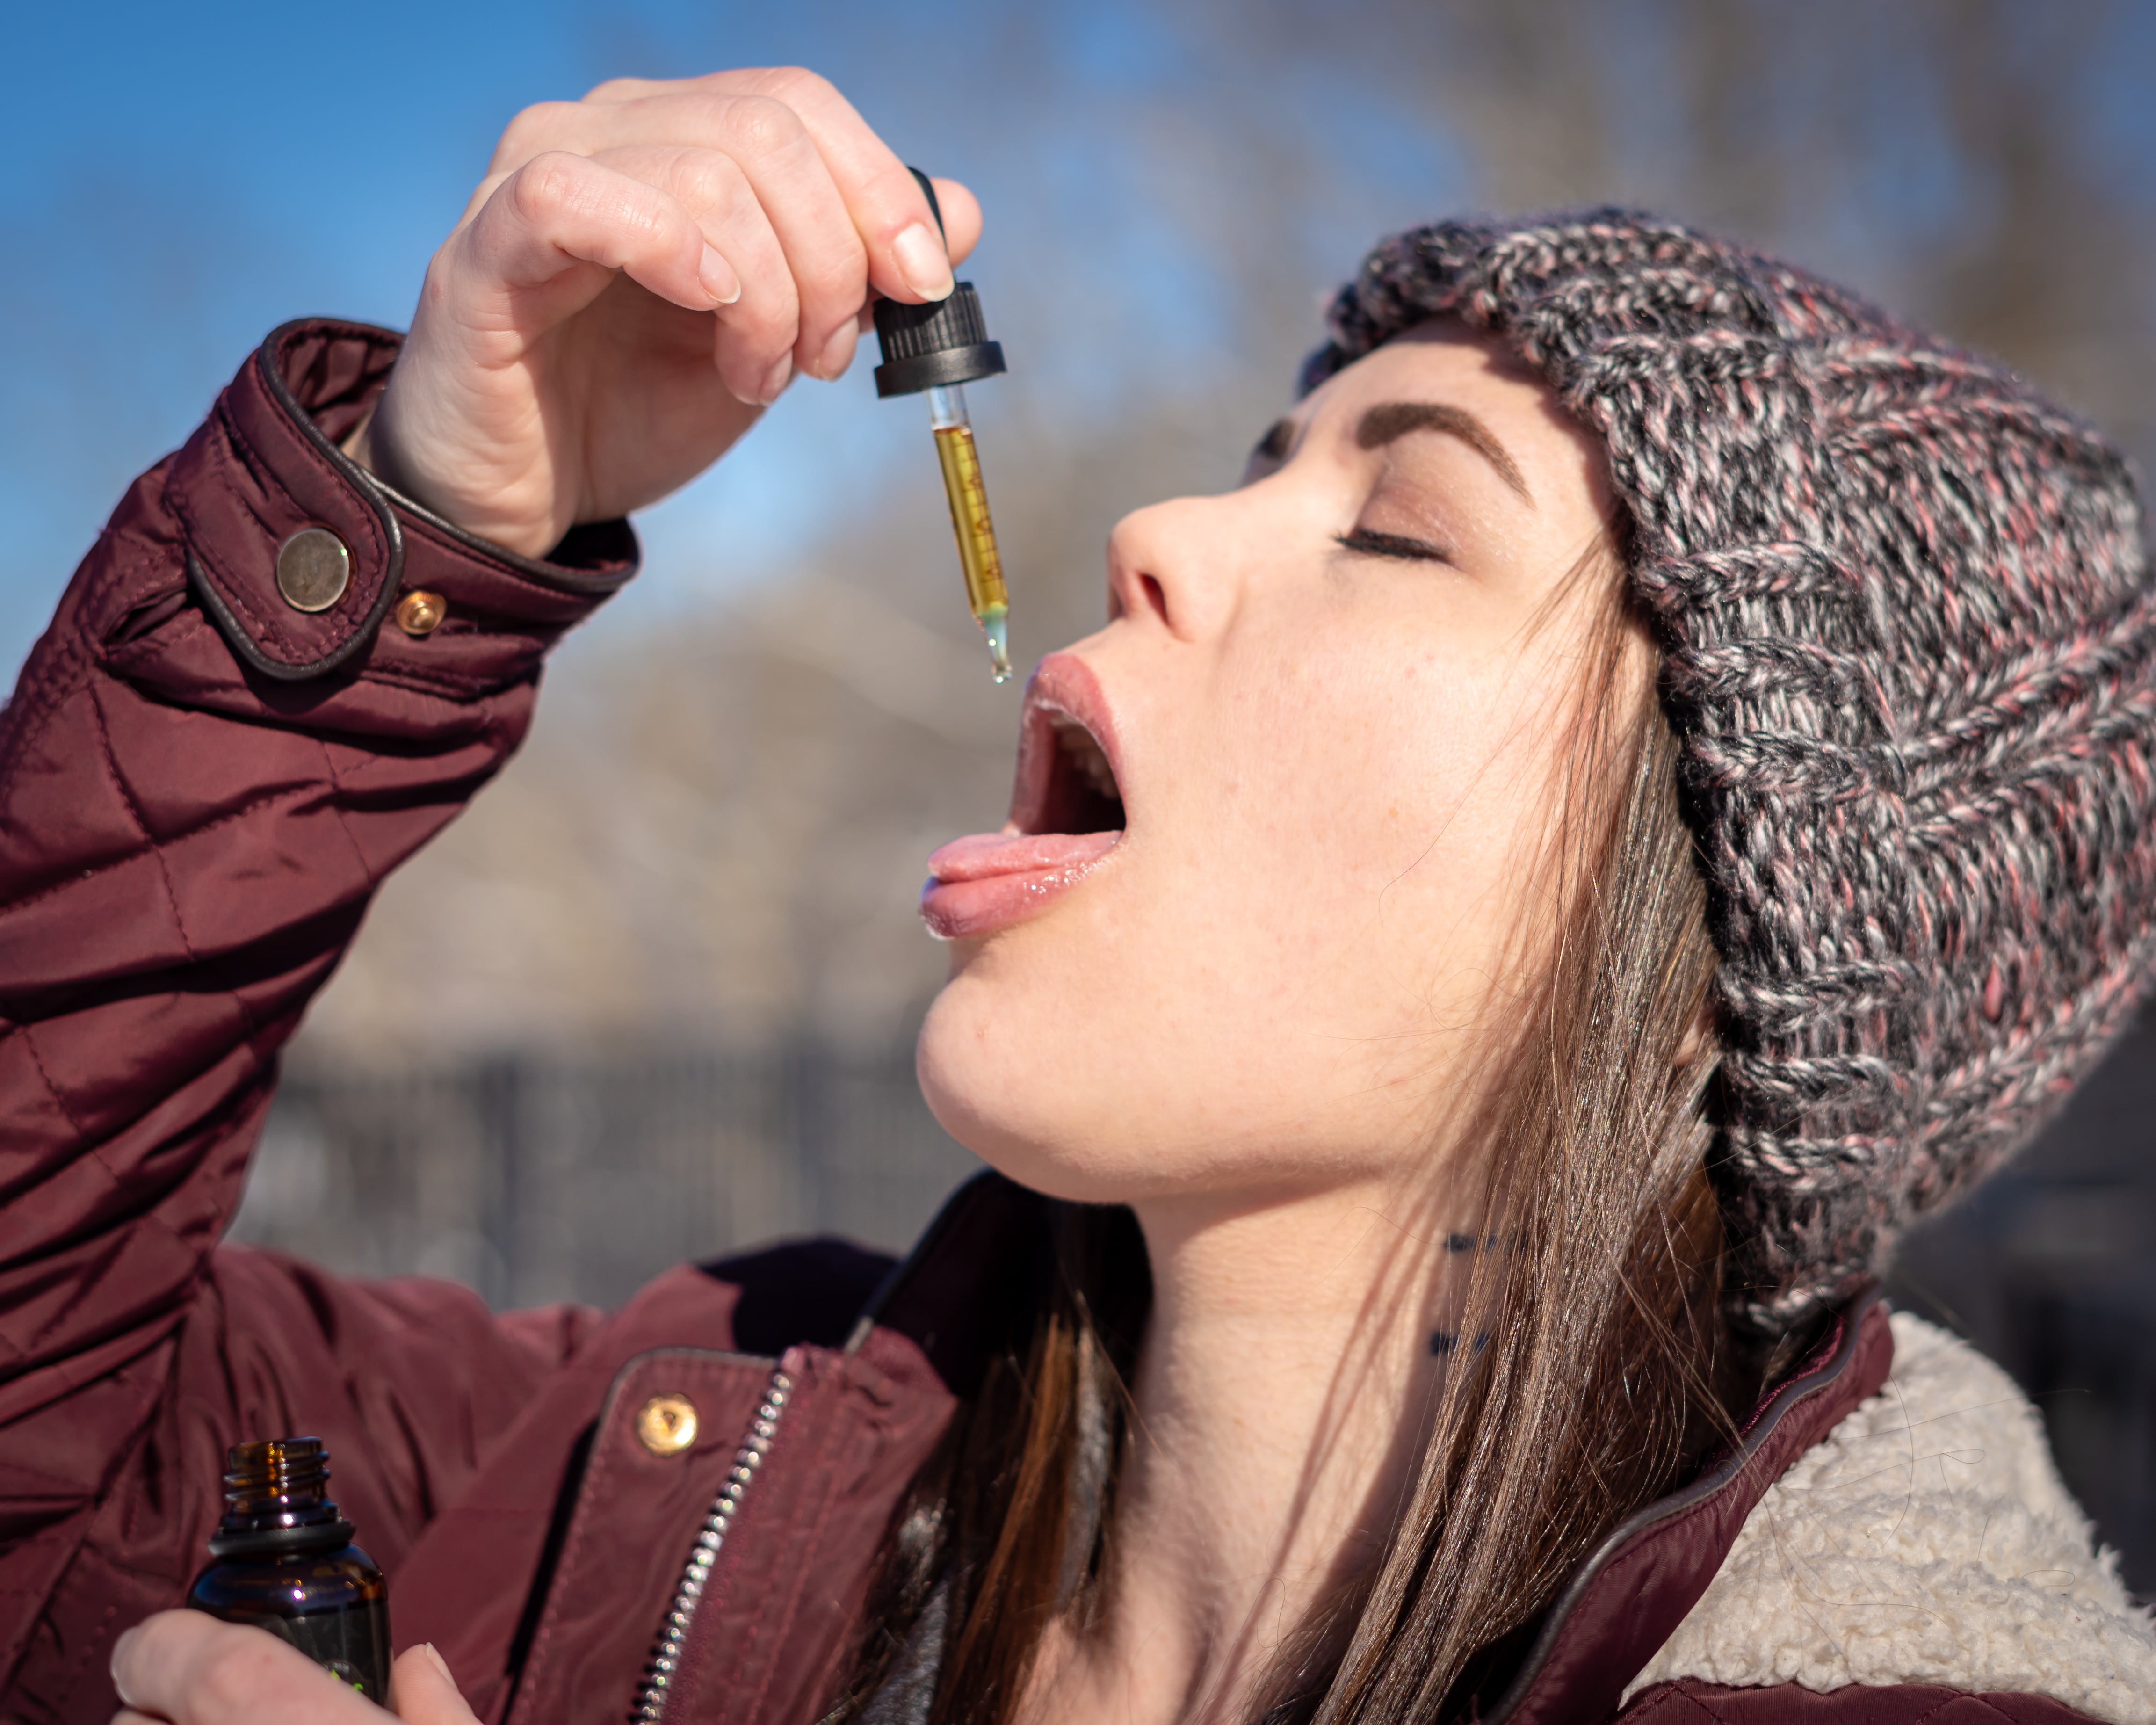 Woman taking CBD oil from tincture placed in mouth